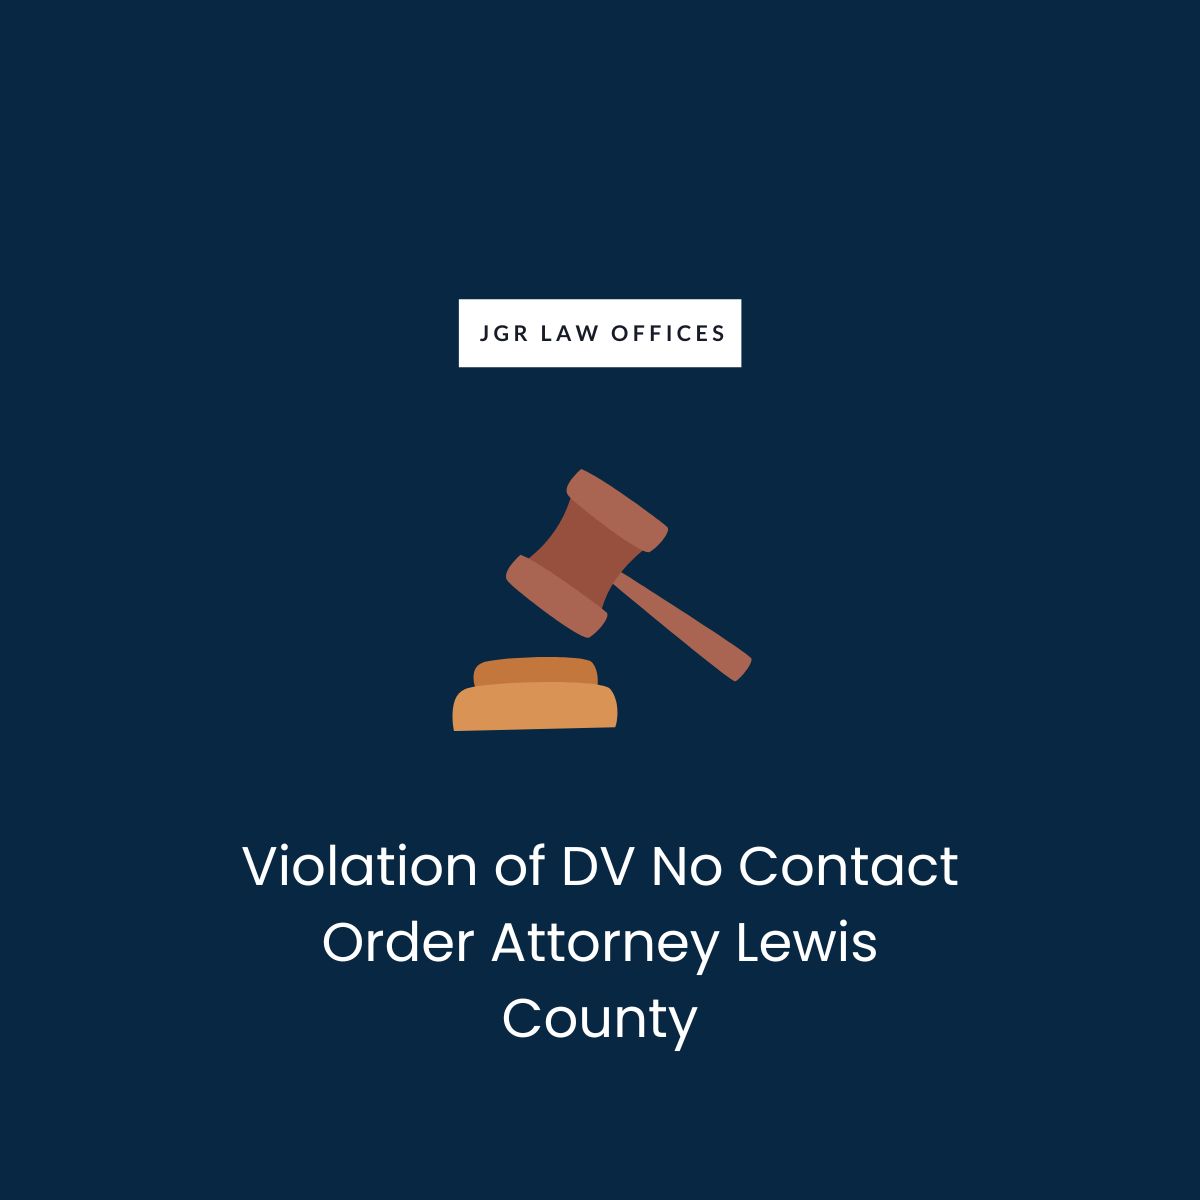 Violation of DV No Contact Order Attorney Lewis County